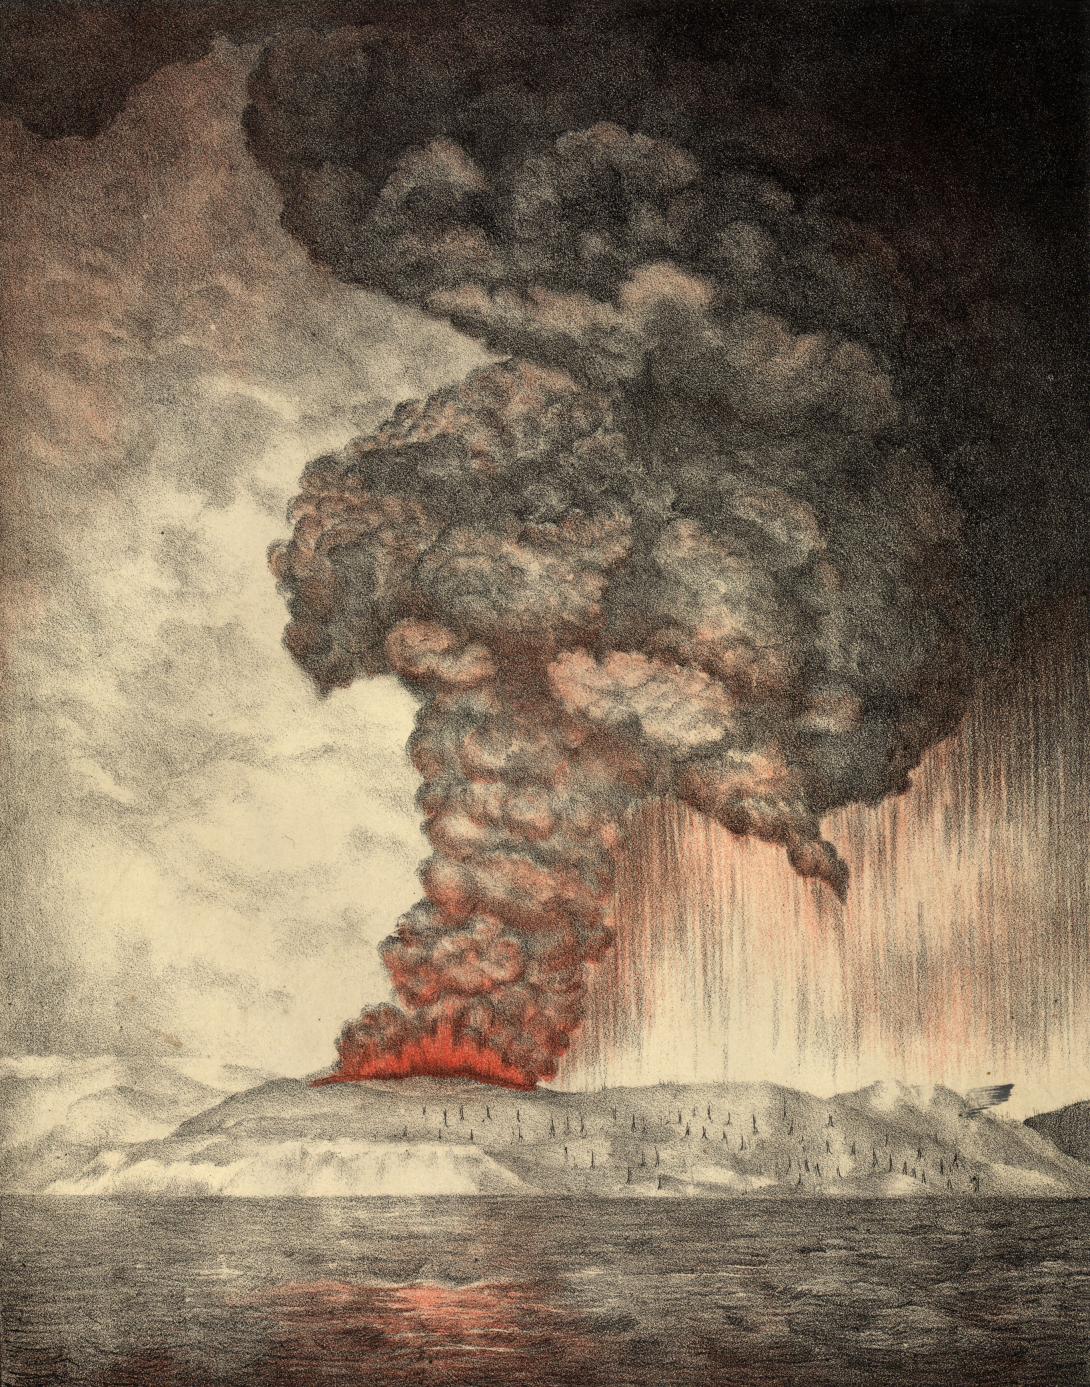 A lithograph depicting a volcano erupting on an island; the sky is yellow and grey with ash and fire.